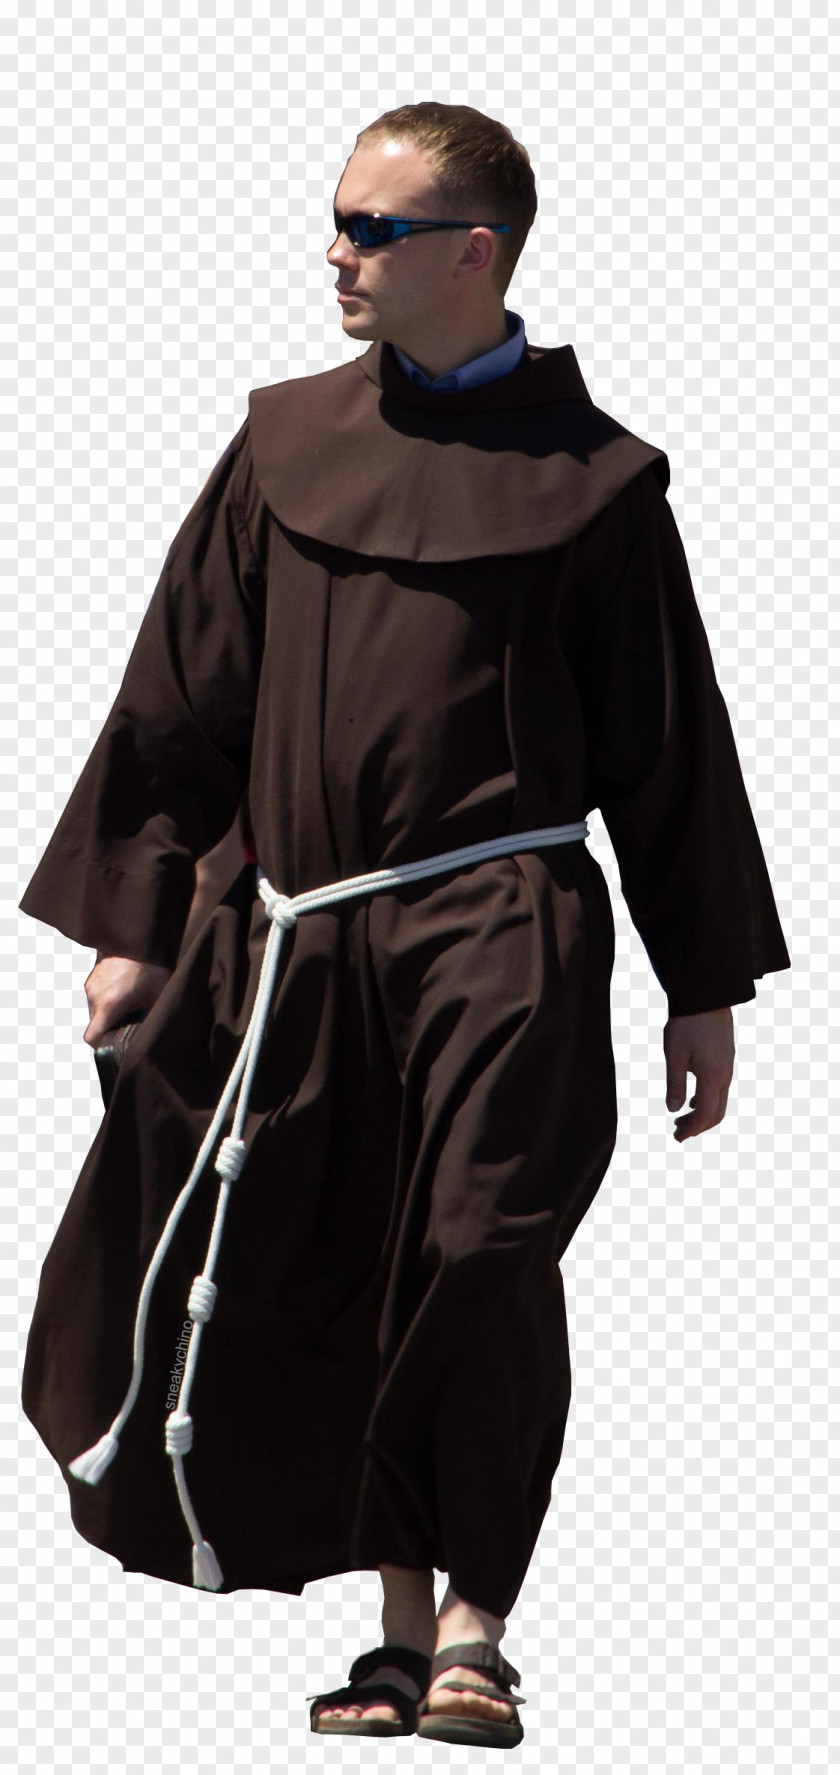 Monk Robe Outerwear Academic Dress Costume Profession PNG